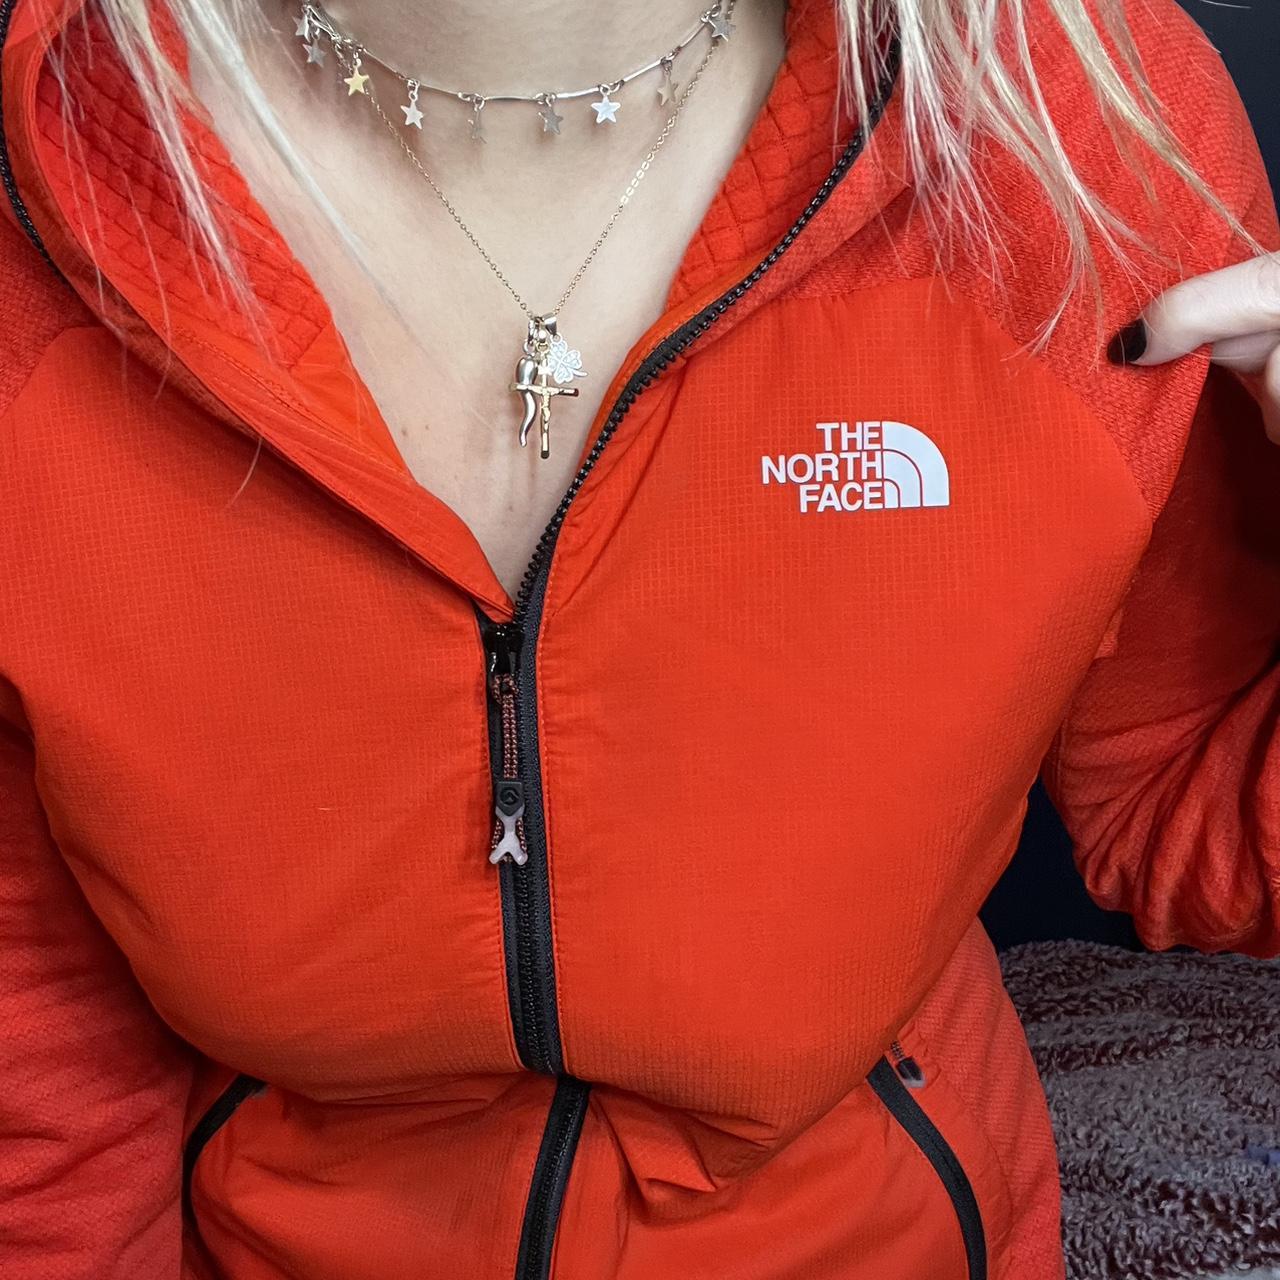 The North Face Women's Red Jacket (2)